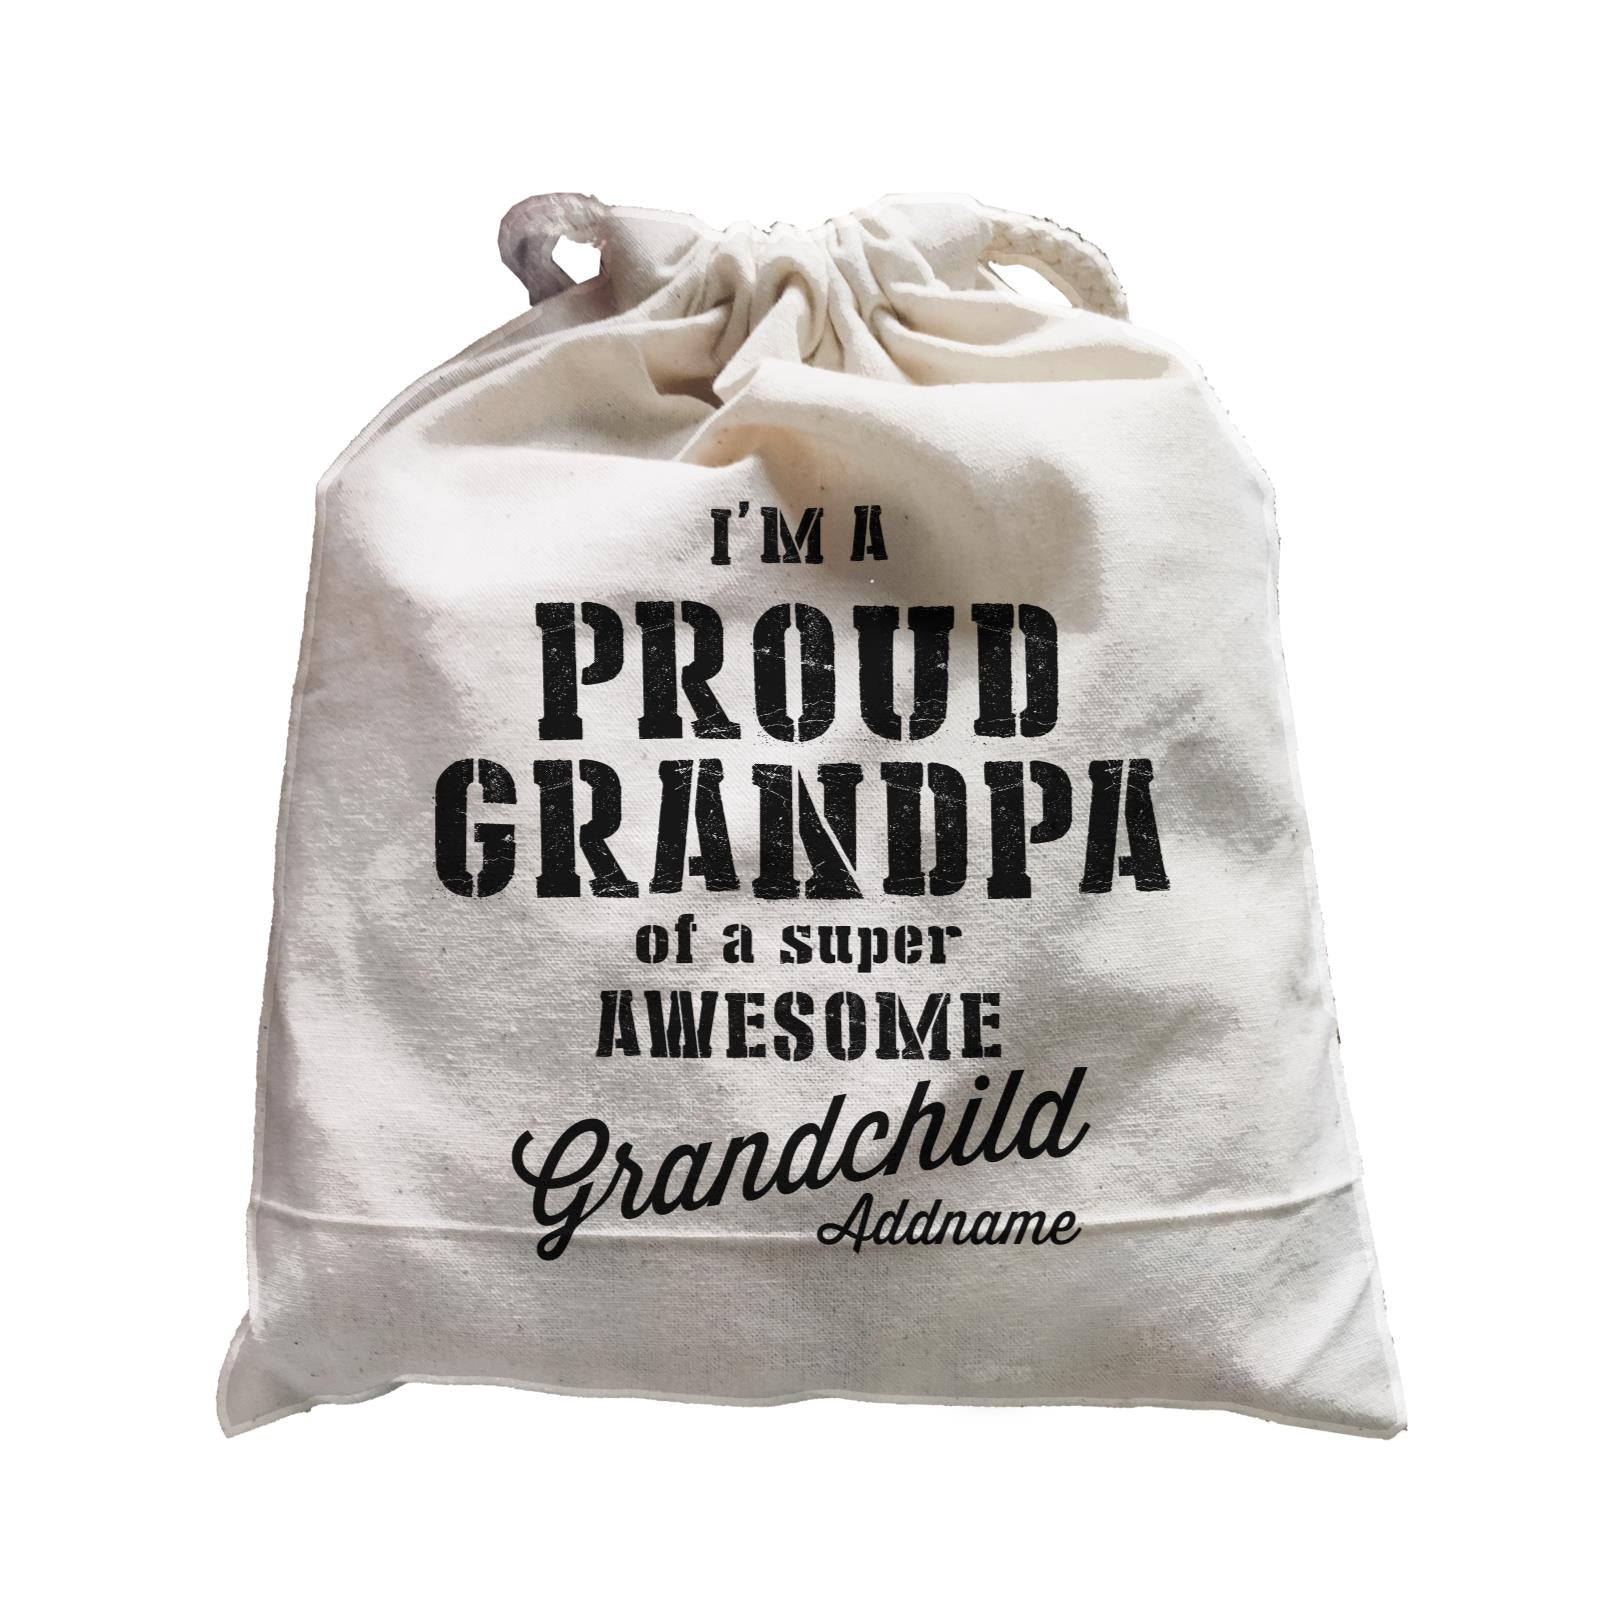 Proud Family Im A Proud Grandpa Of A Super Awesome Grandchild Addname Satchel